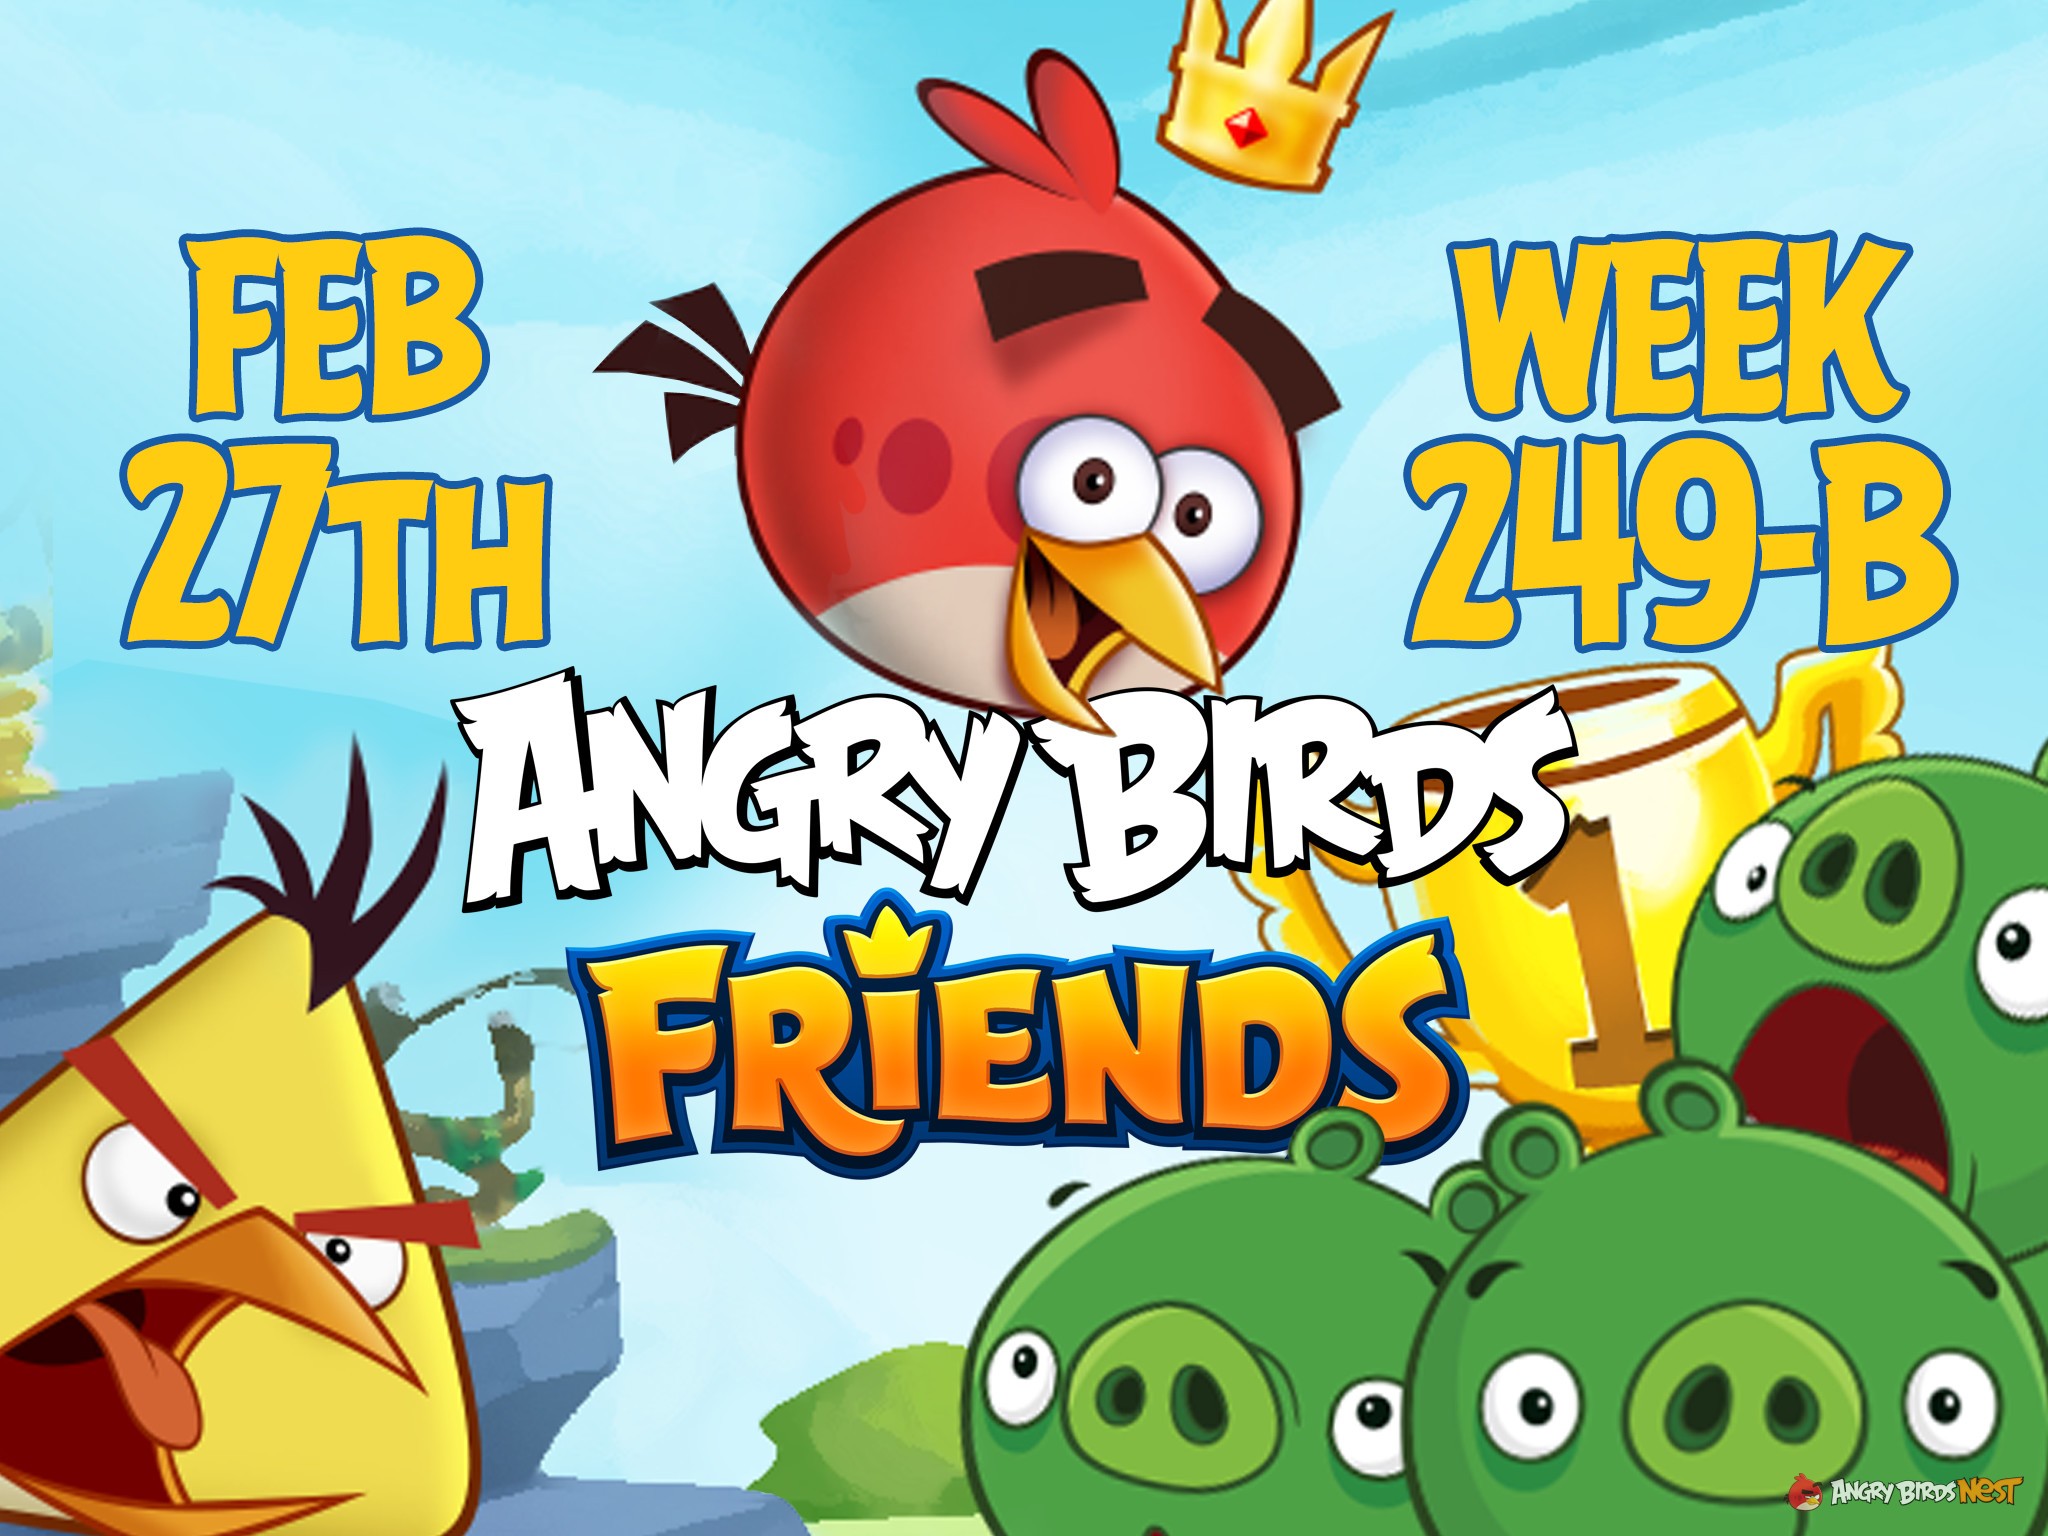 Angry Birds Friends Tournament Week 249-B Feature Image